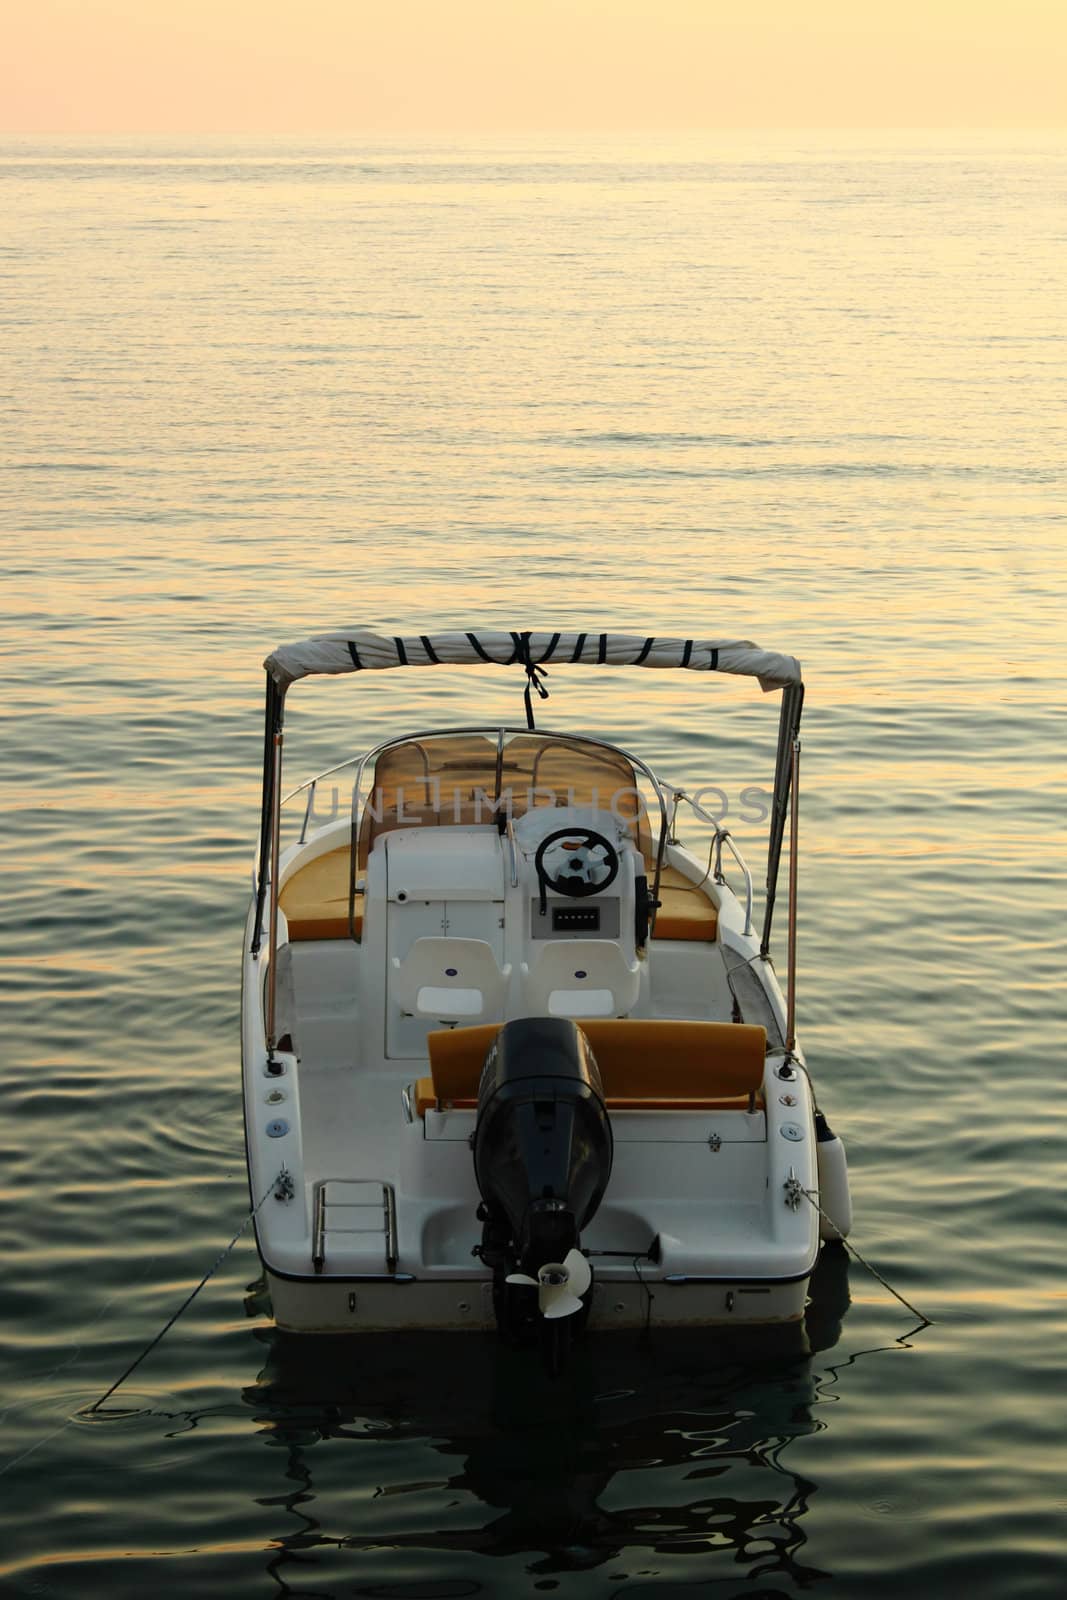 backside of small motorized boat with sunset